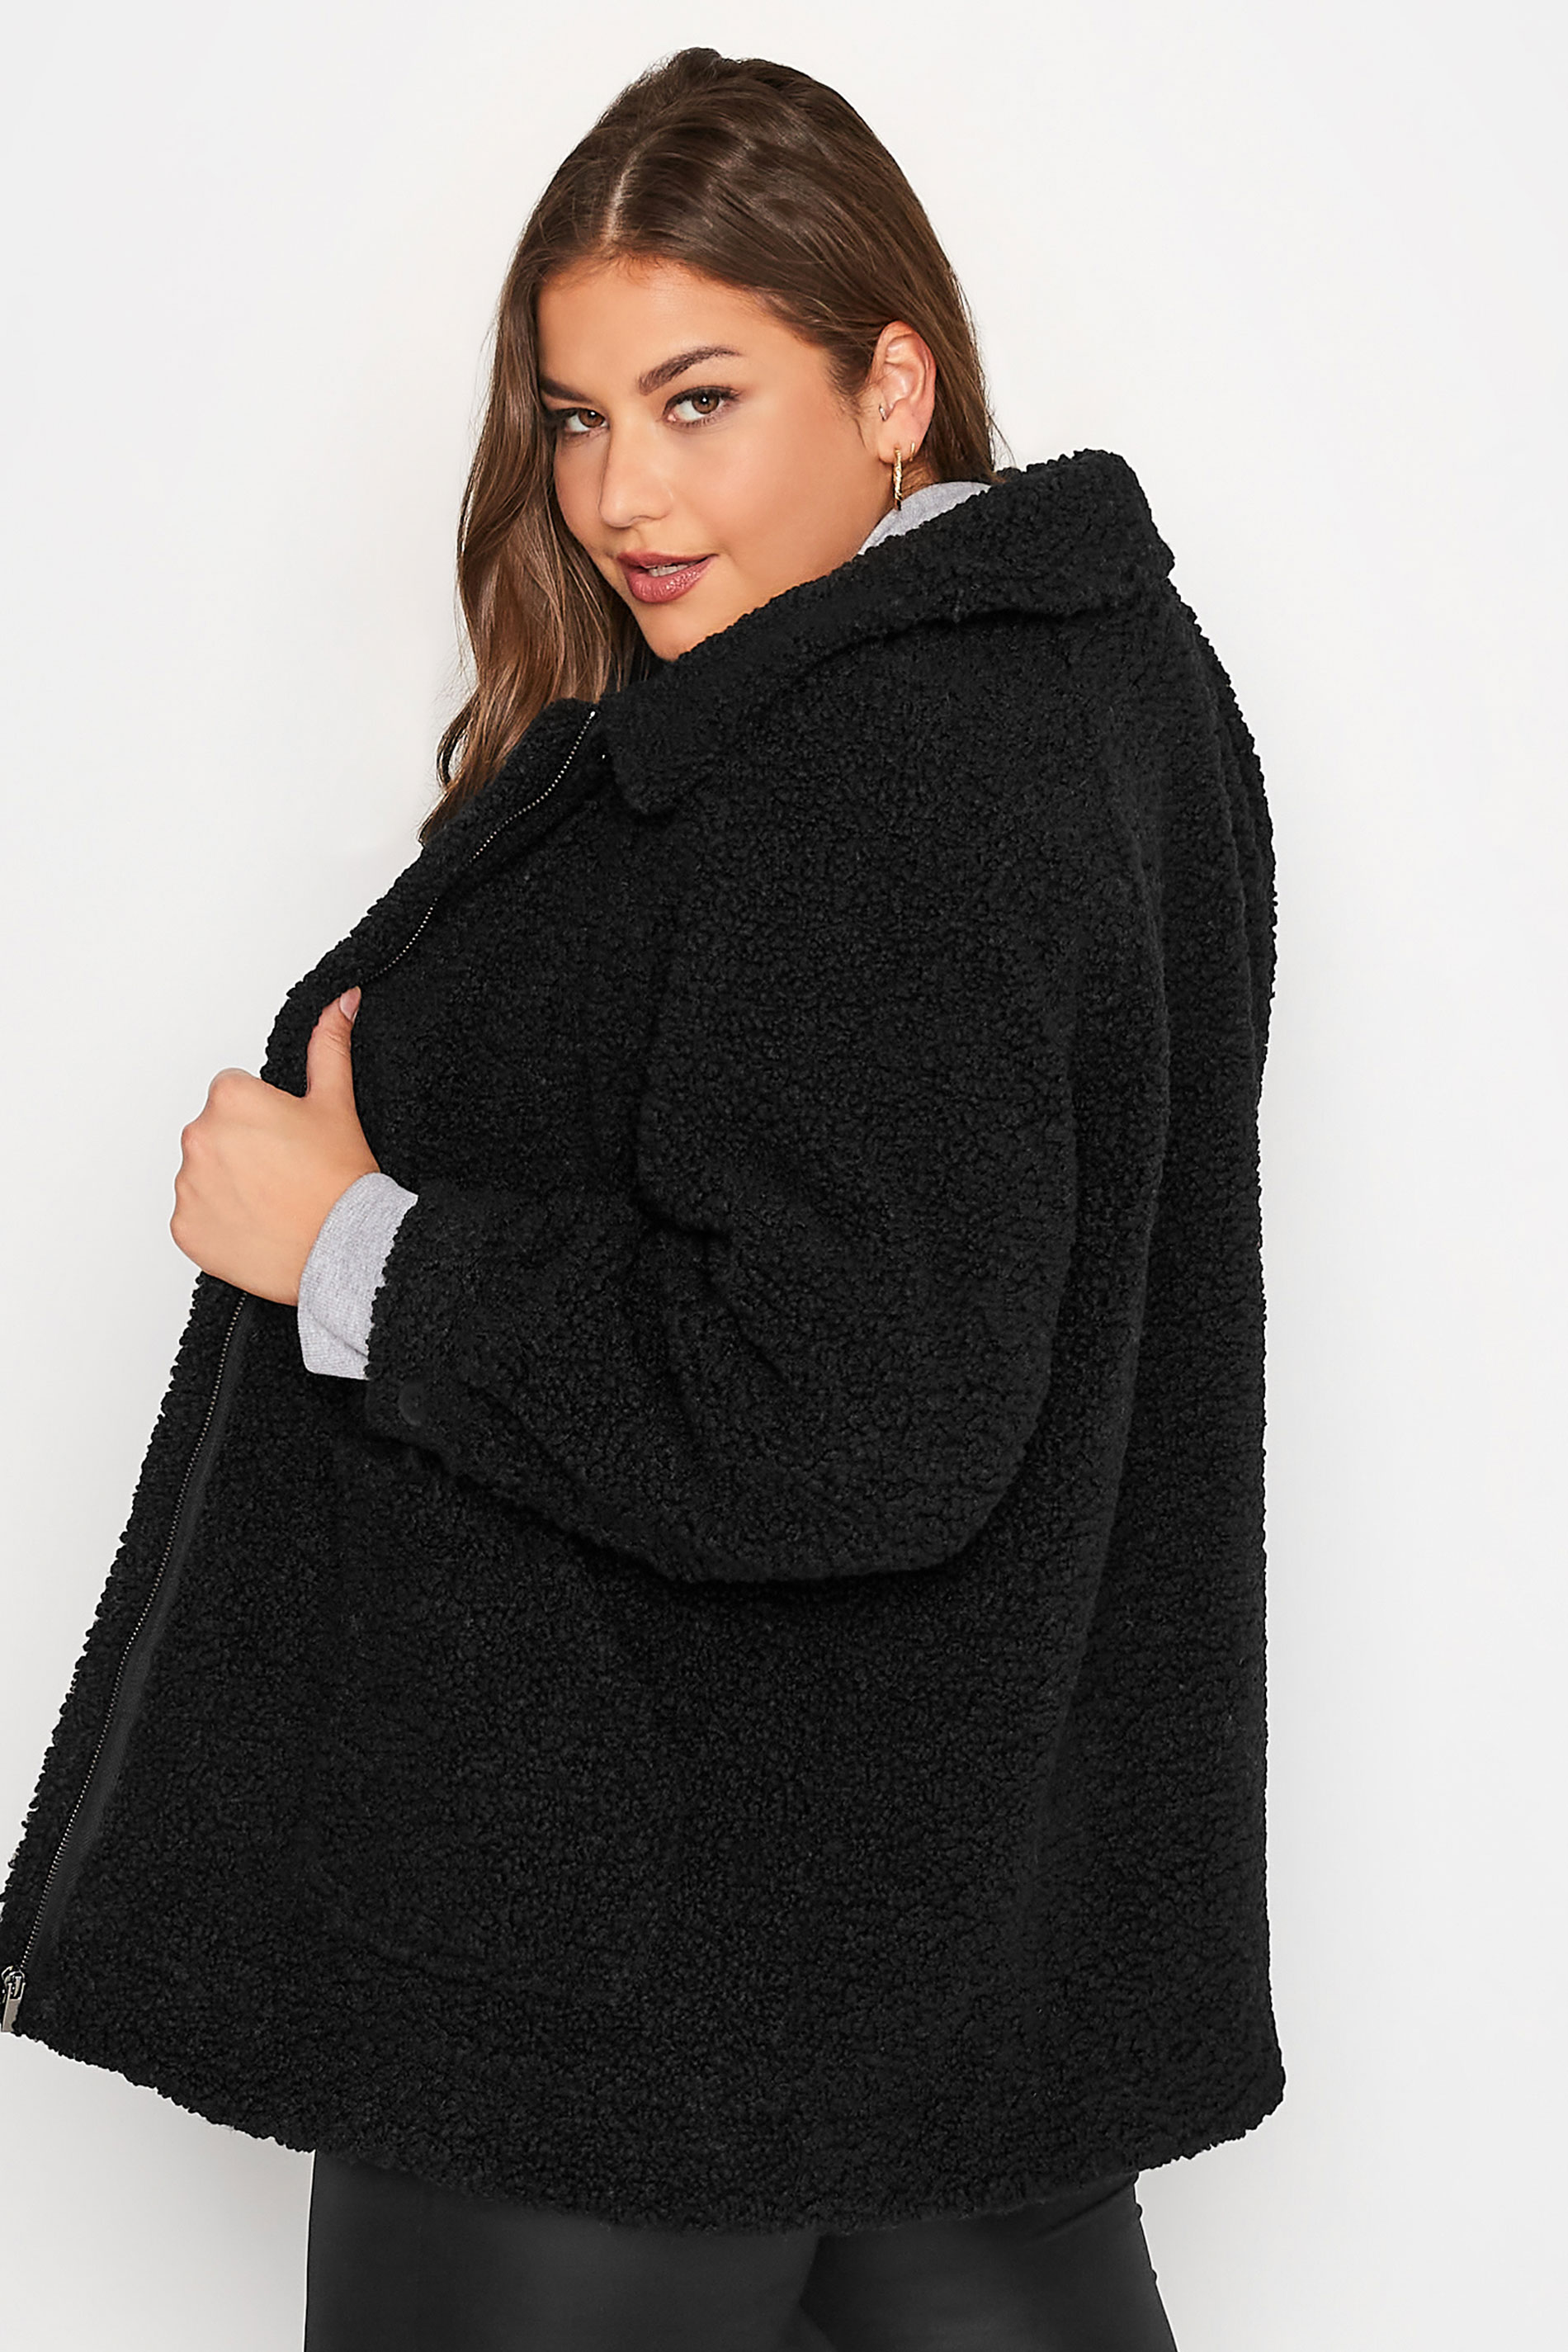 Plus Size Black Teddy Collared Jacket | Yours Clothing